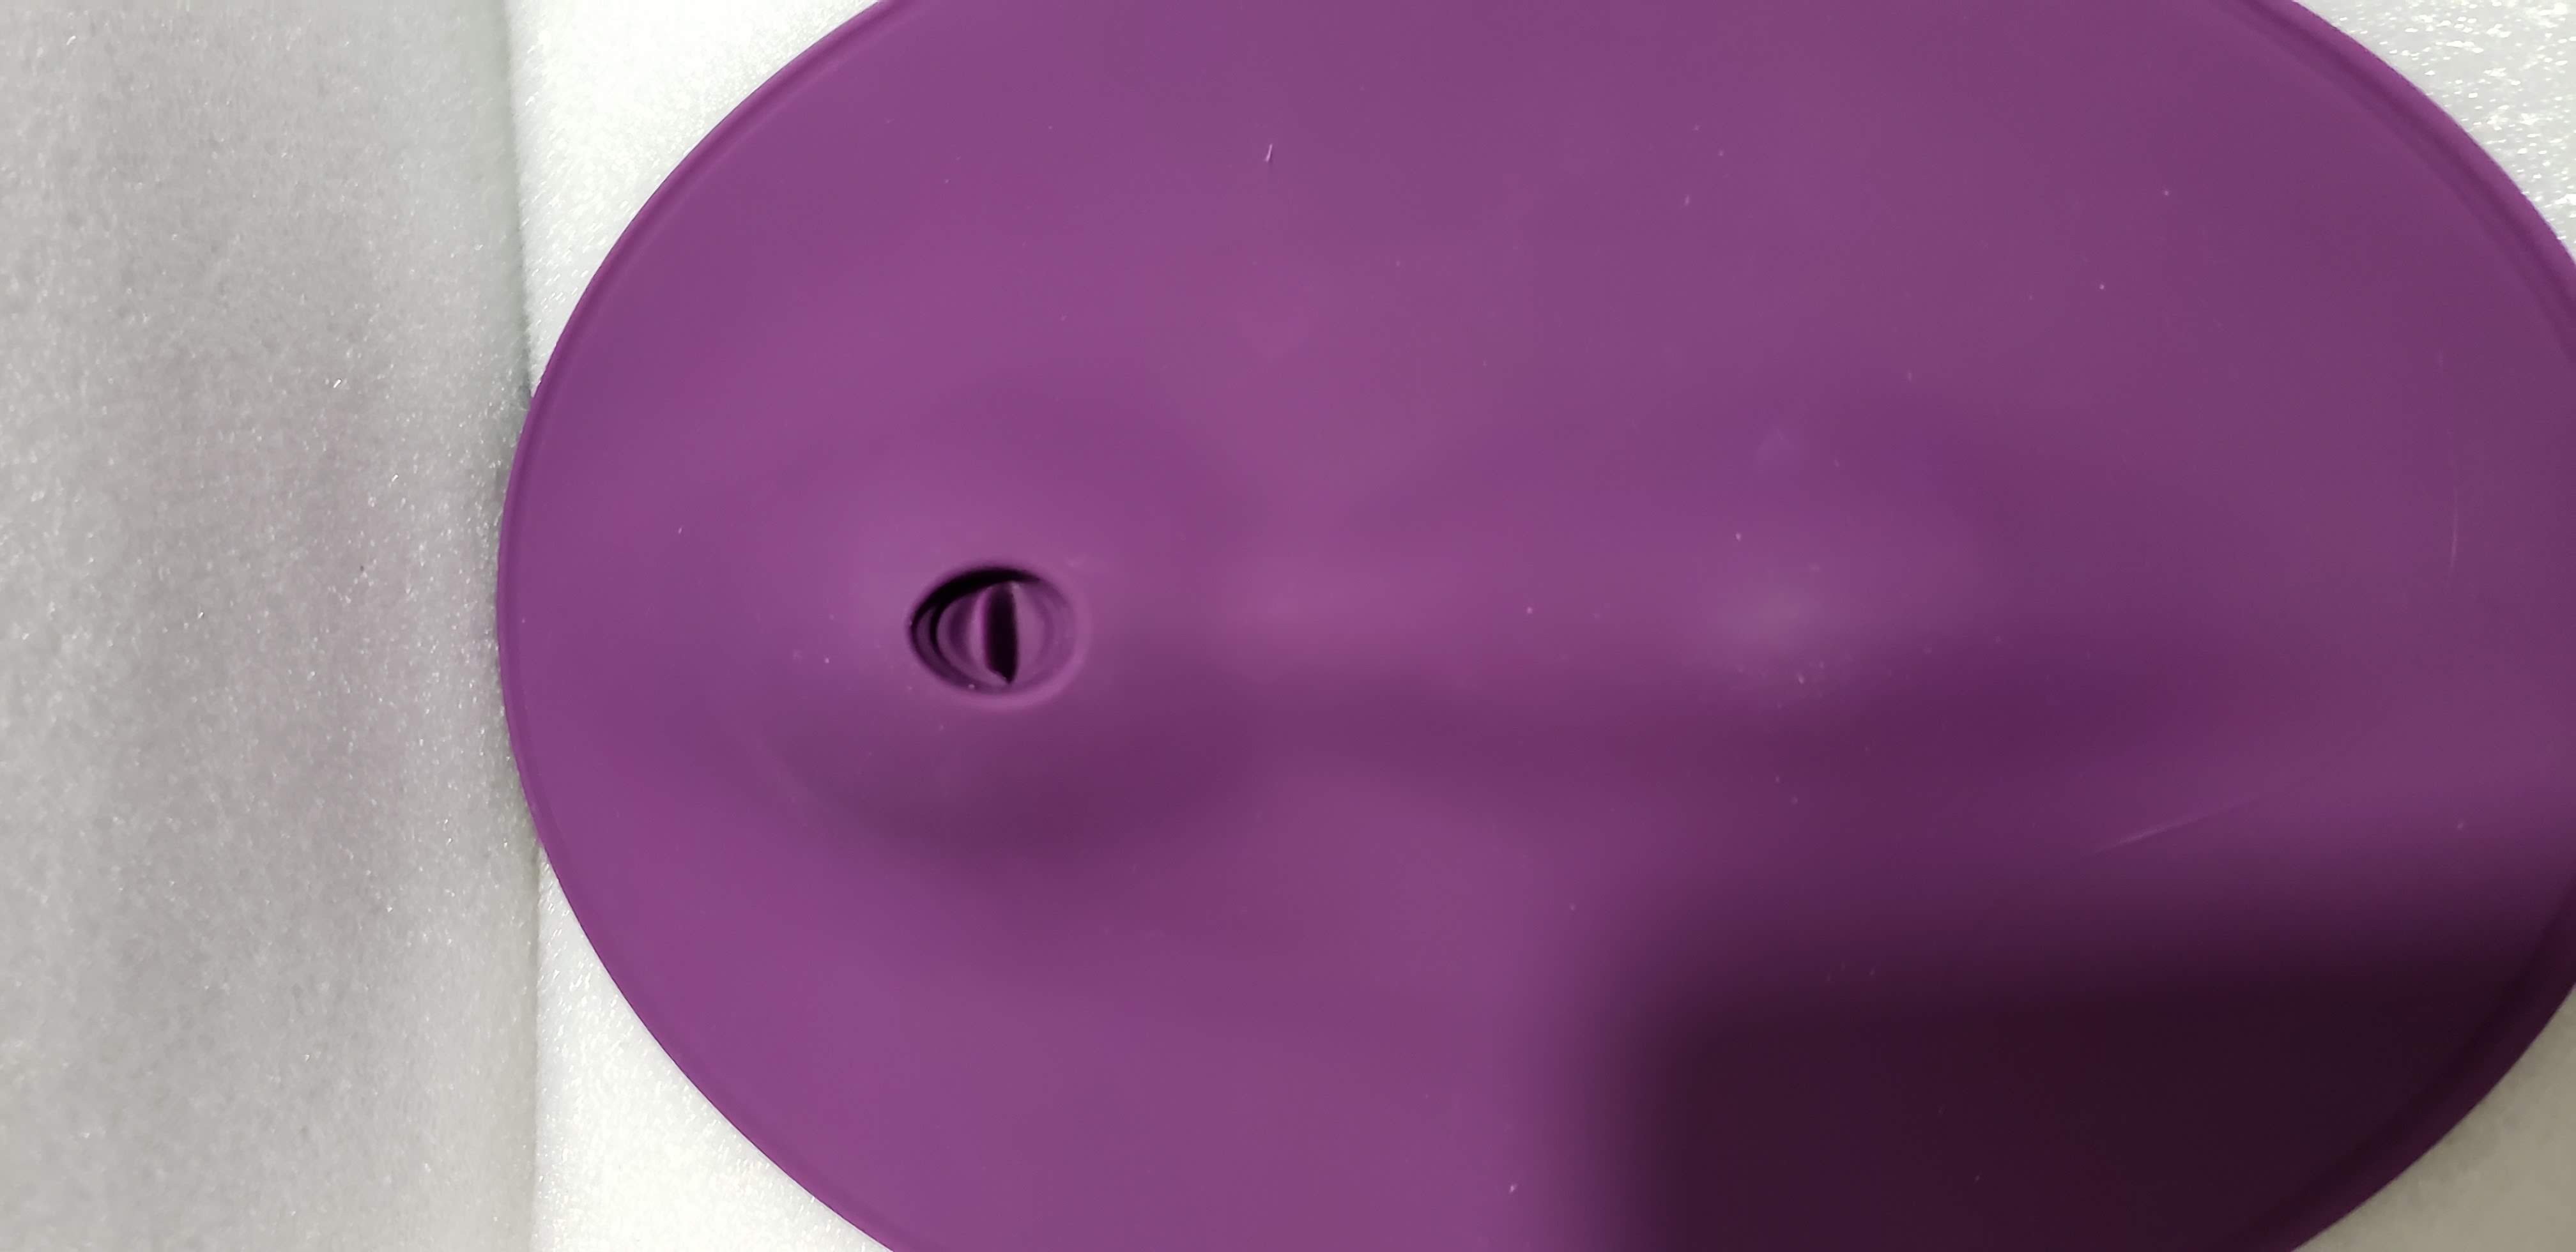 Orion VibePad 2: a purple oval with a hole in the center near the top.